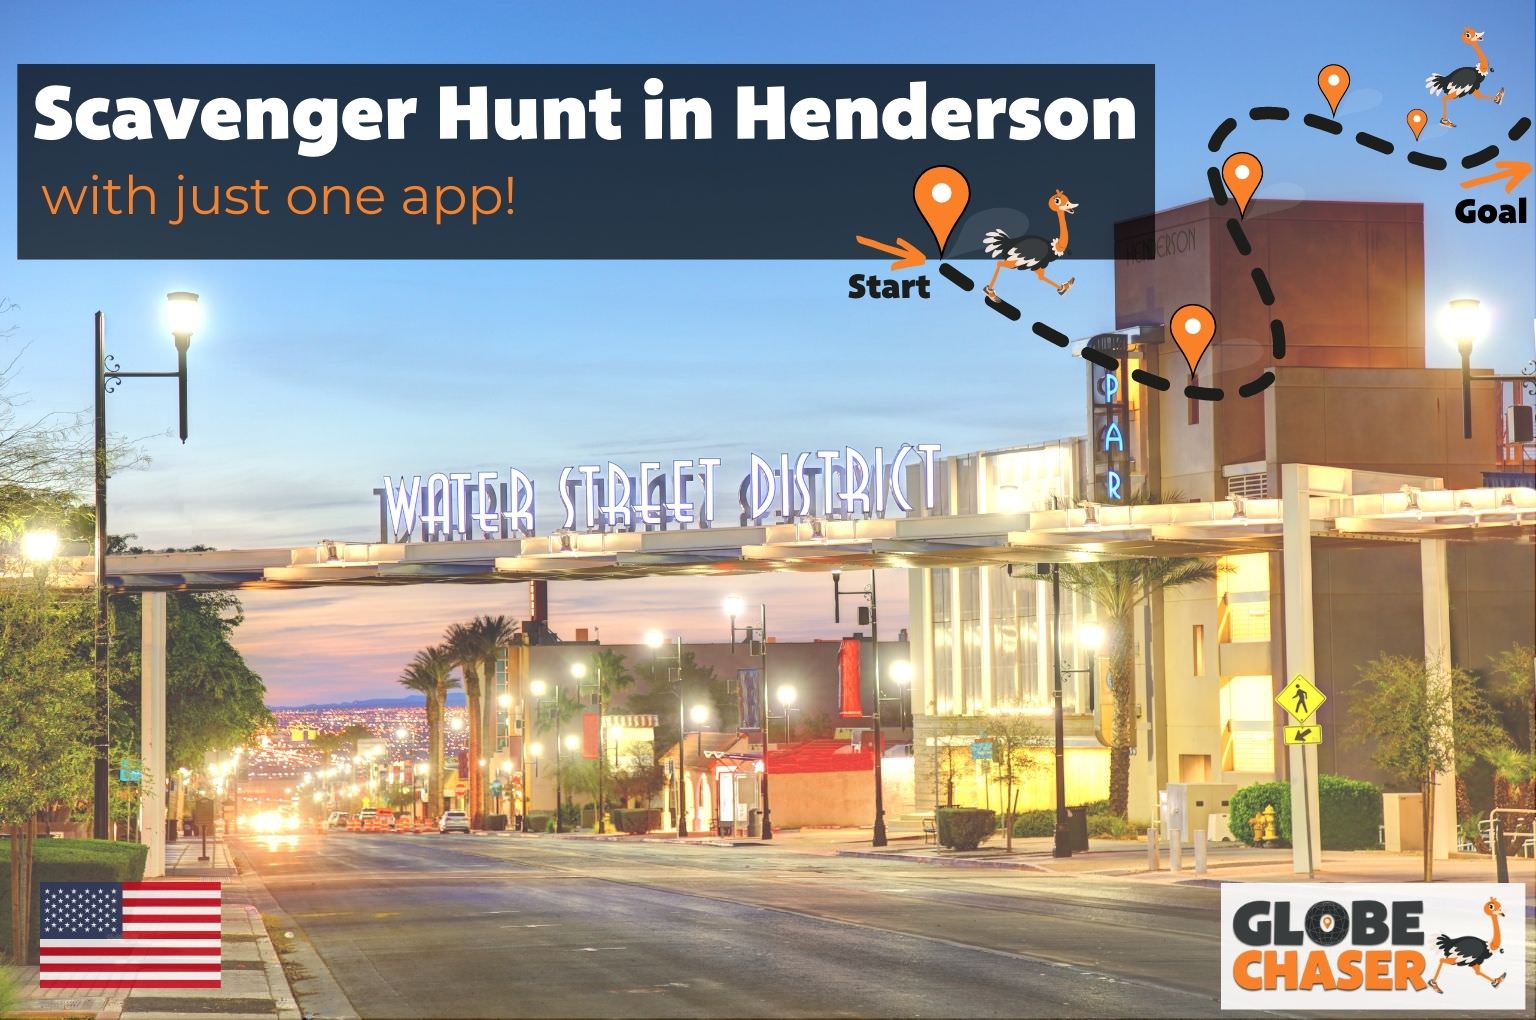 Scavenger Hunt in Henderson, USA - Family Activities with the Globe Chaser App for Outdoor Fun